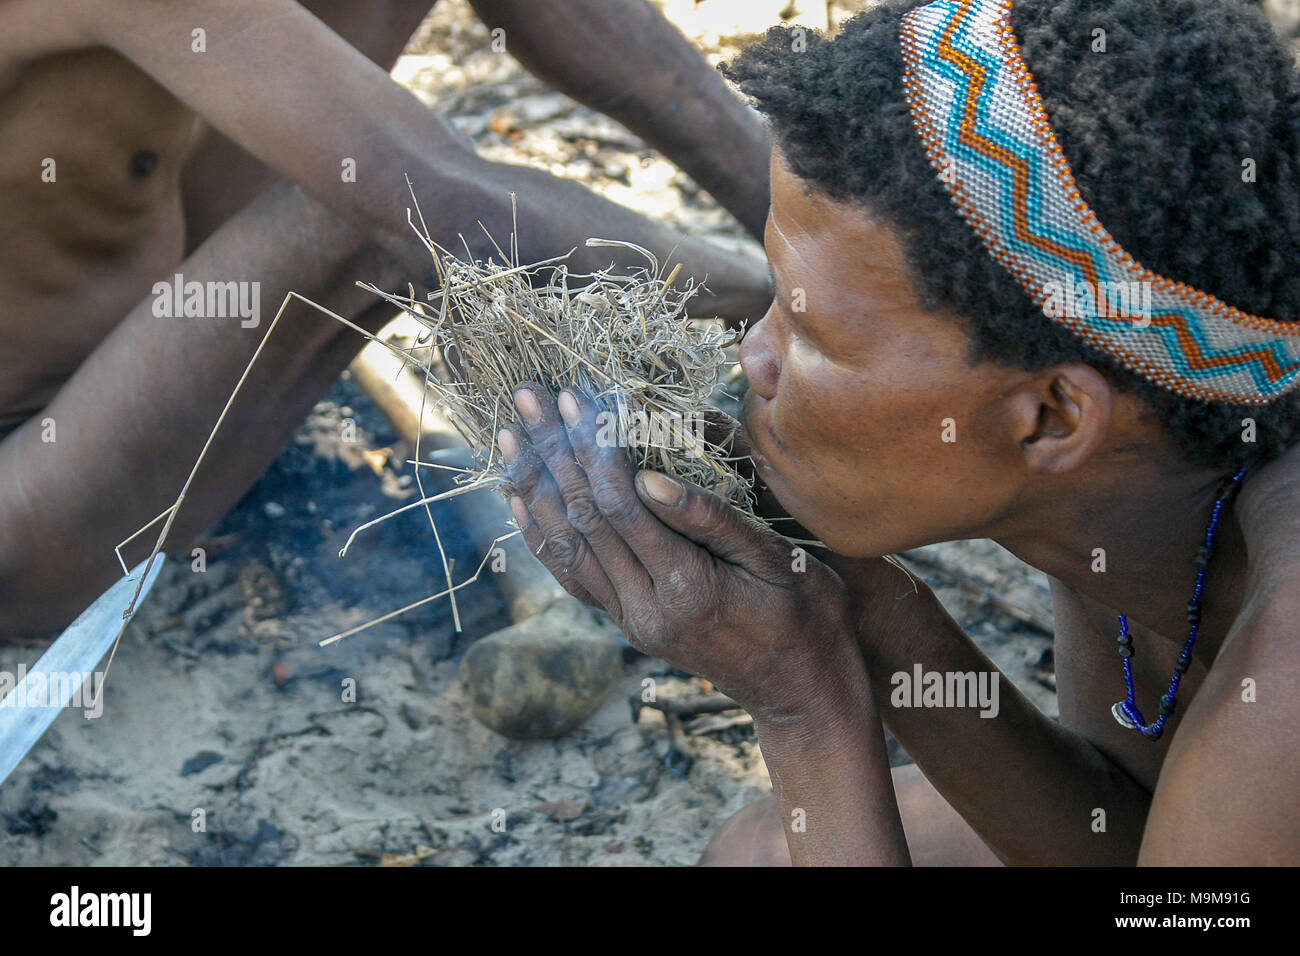 San tribe bushmen, also known as the First Tribe of Africa, making fire the traditional way in the surrounding bushland in Namibia. Stock Photo